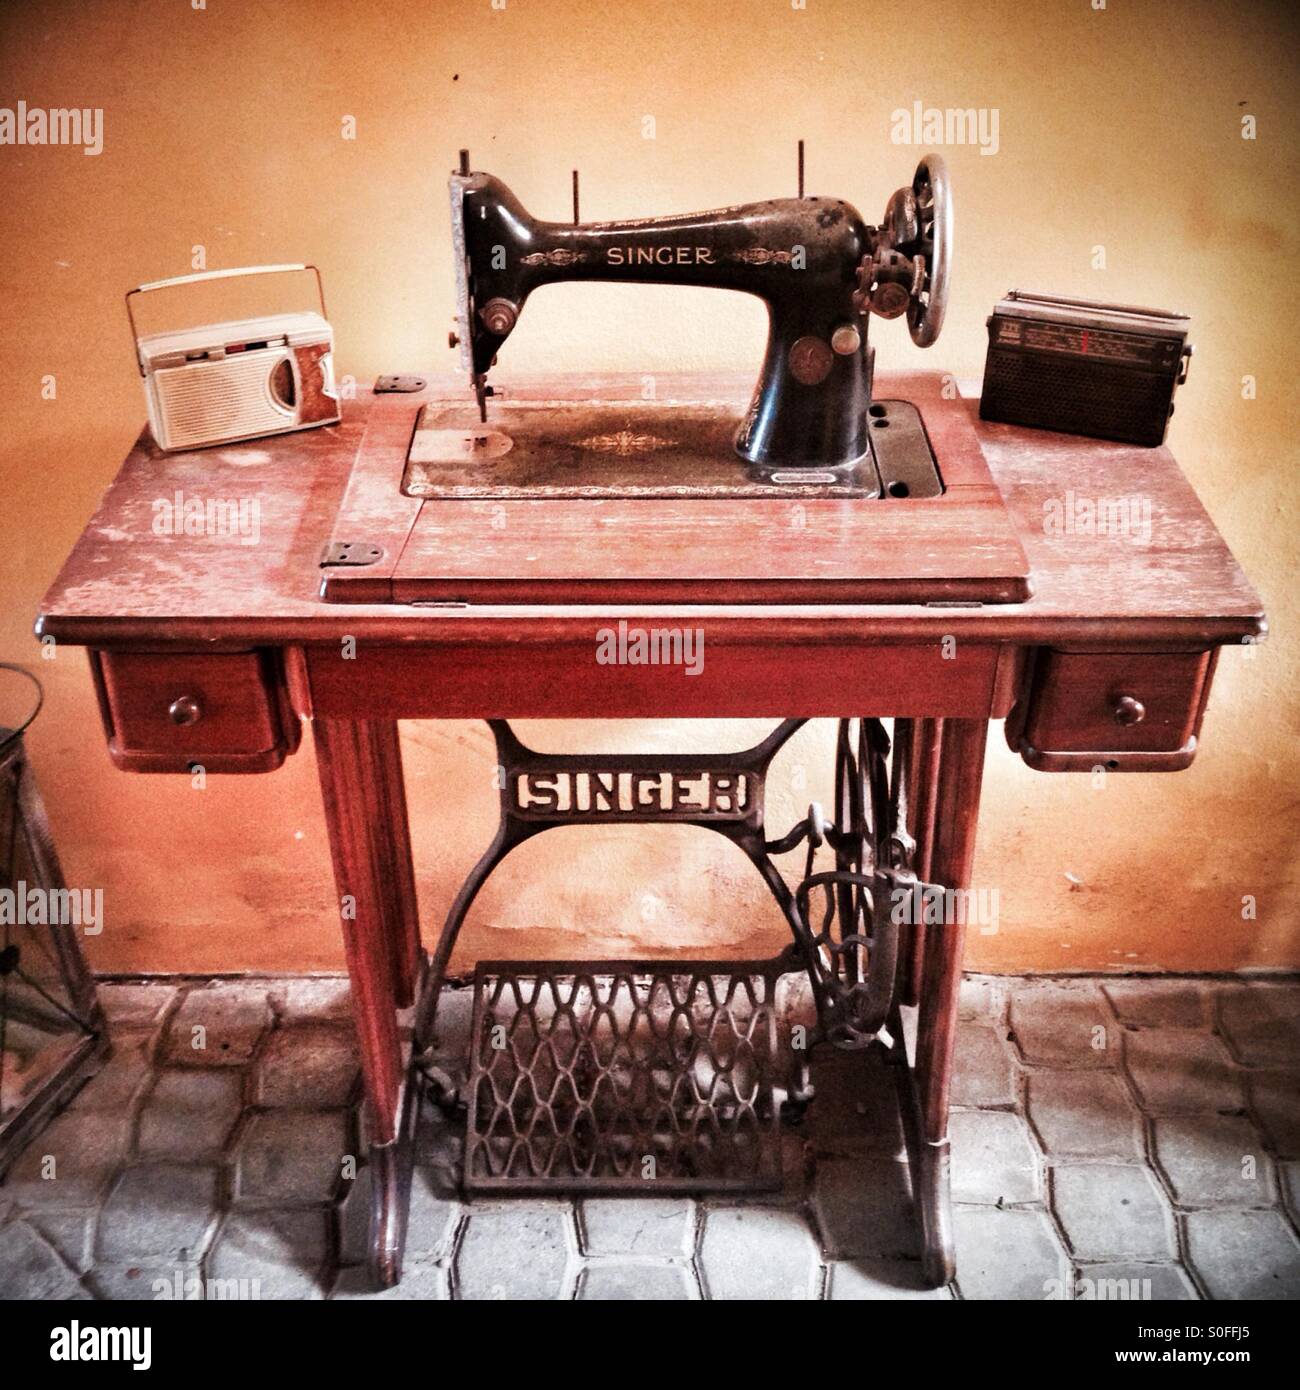 Old Singer sewing machine Stock Photo - Alamy